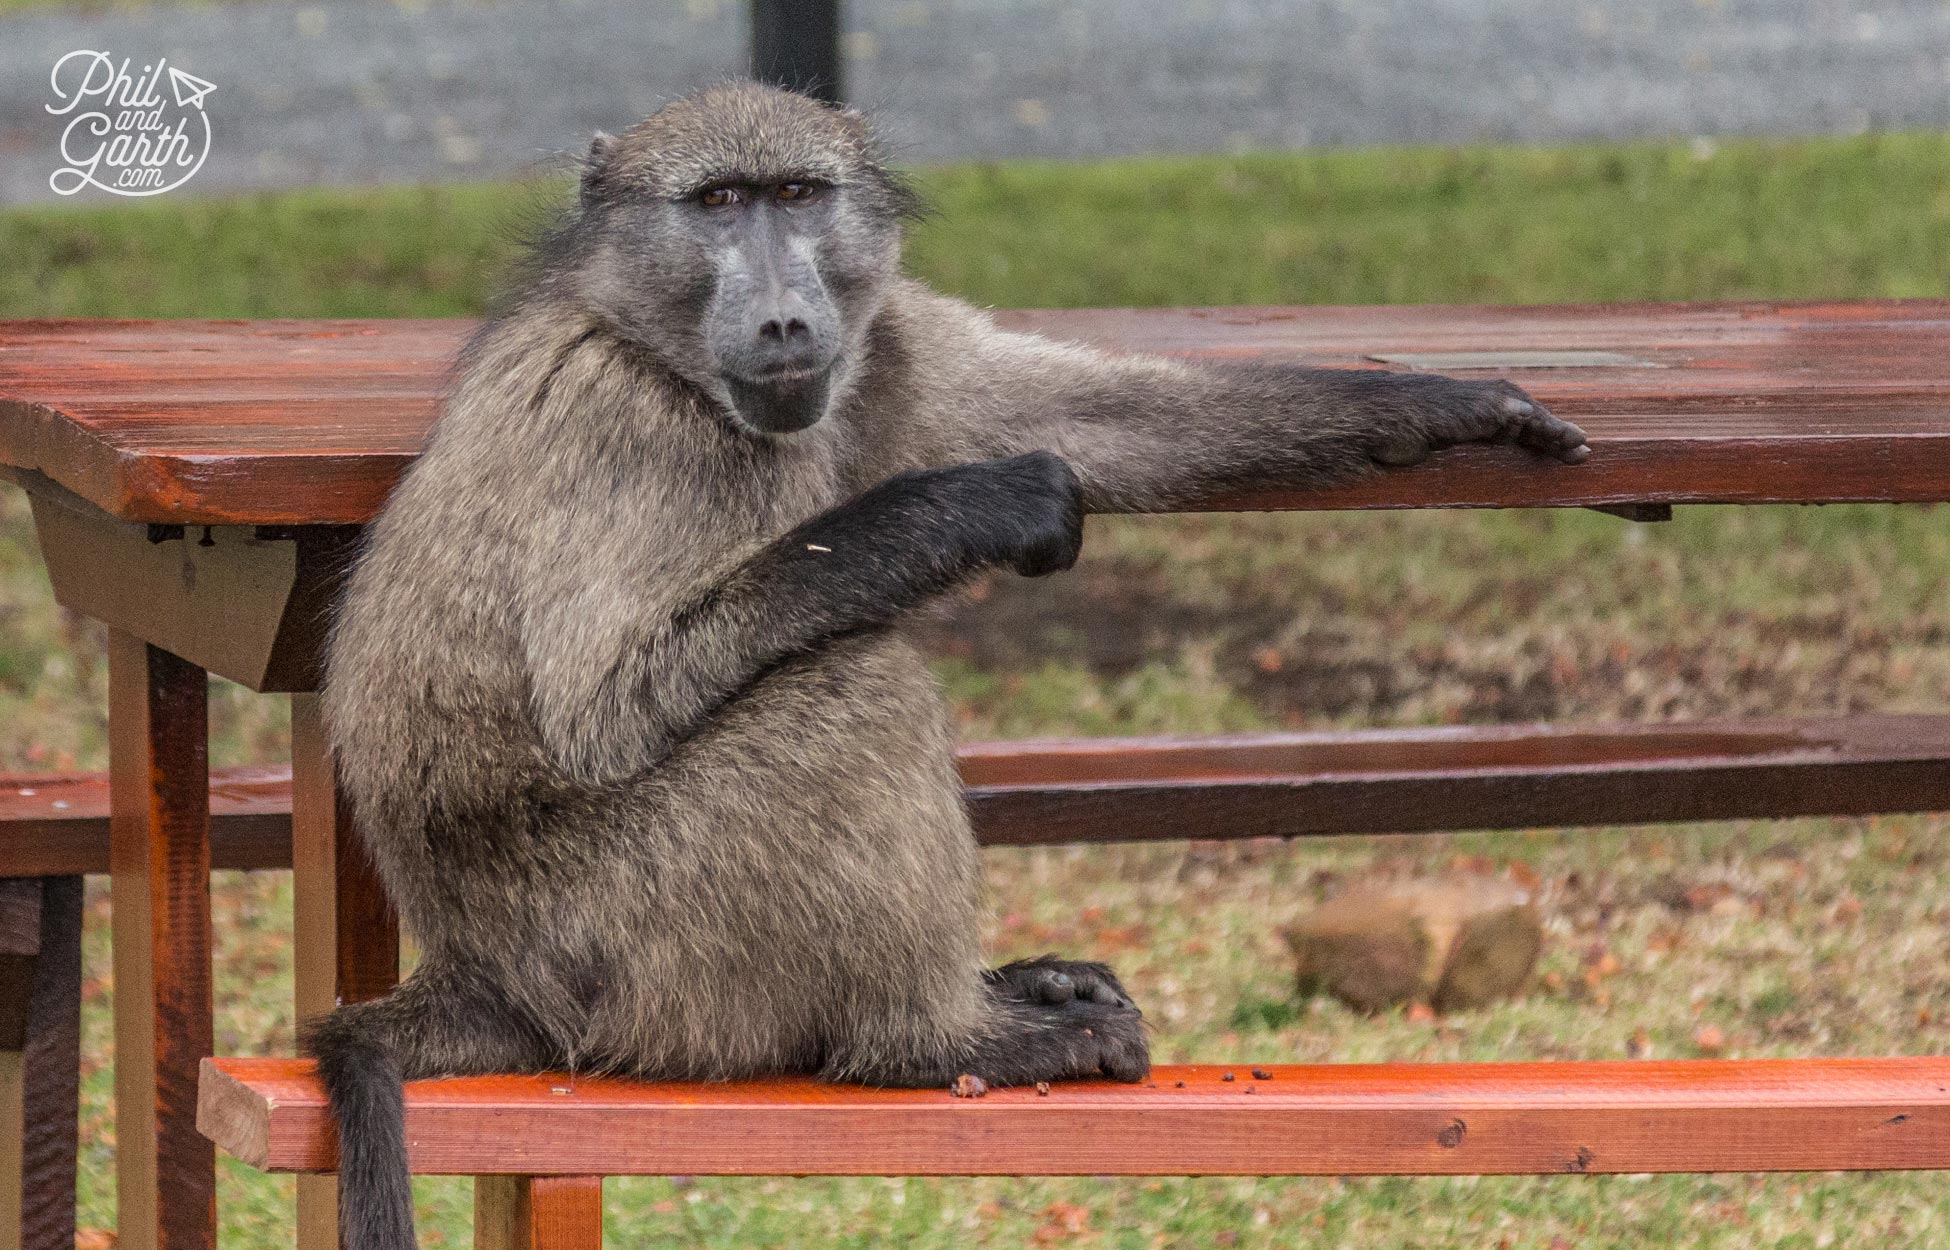 These baboons are so naughty, so watch out!